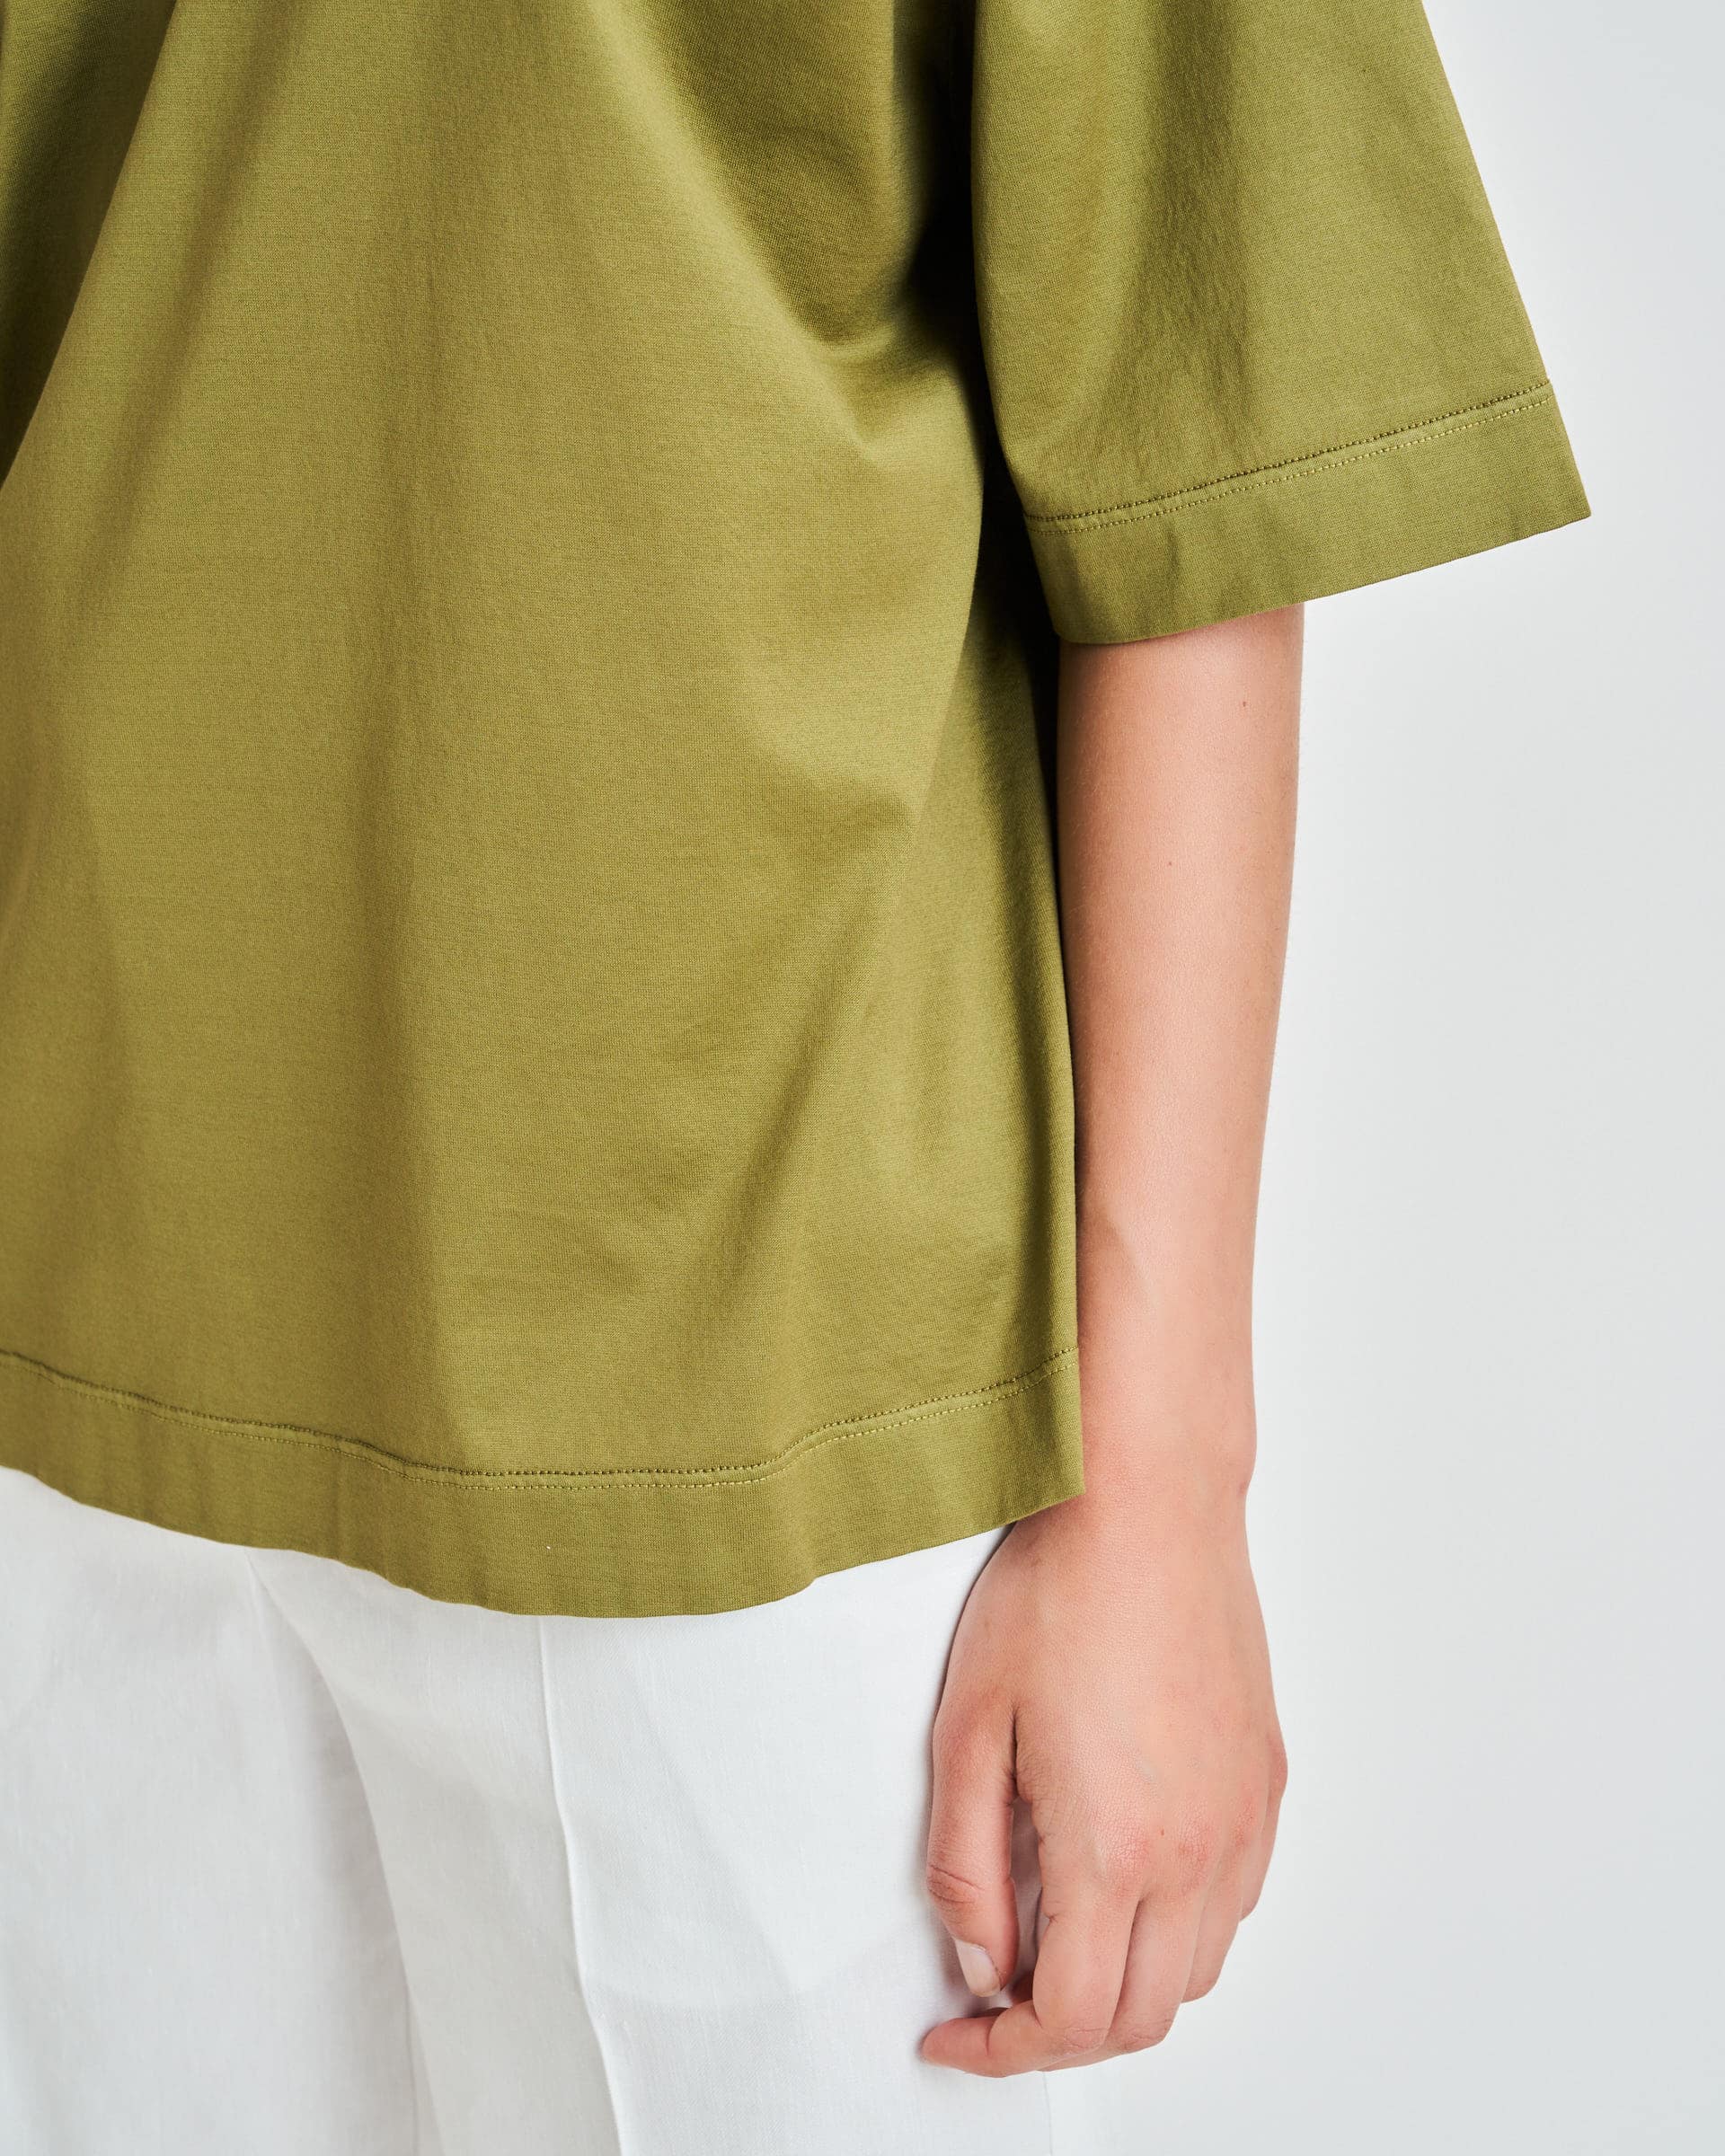 The Market Store | T-shirt With Neckline On The Back